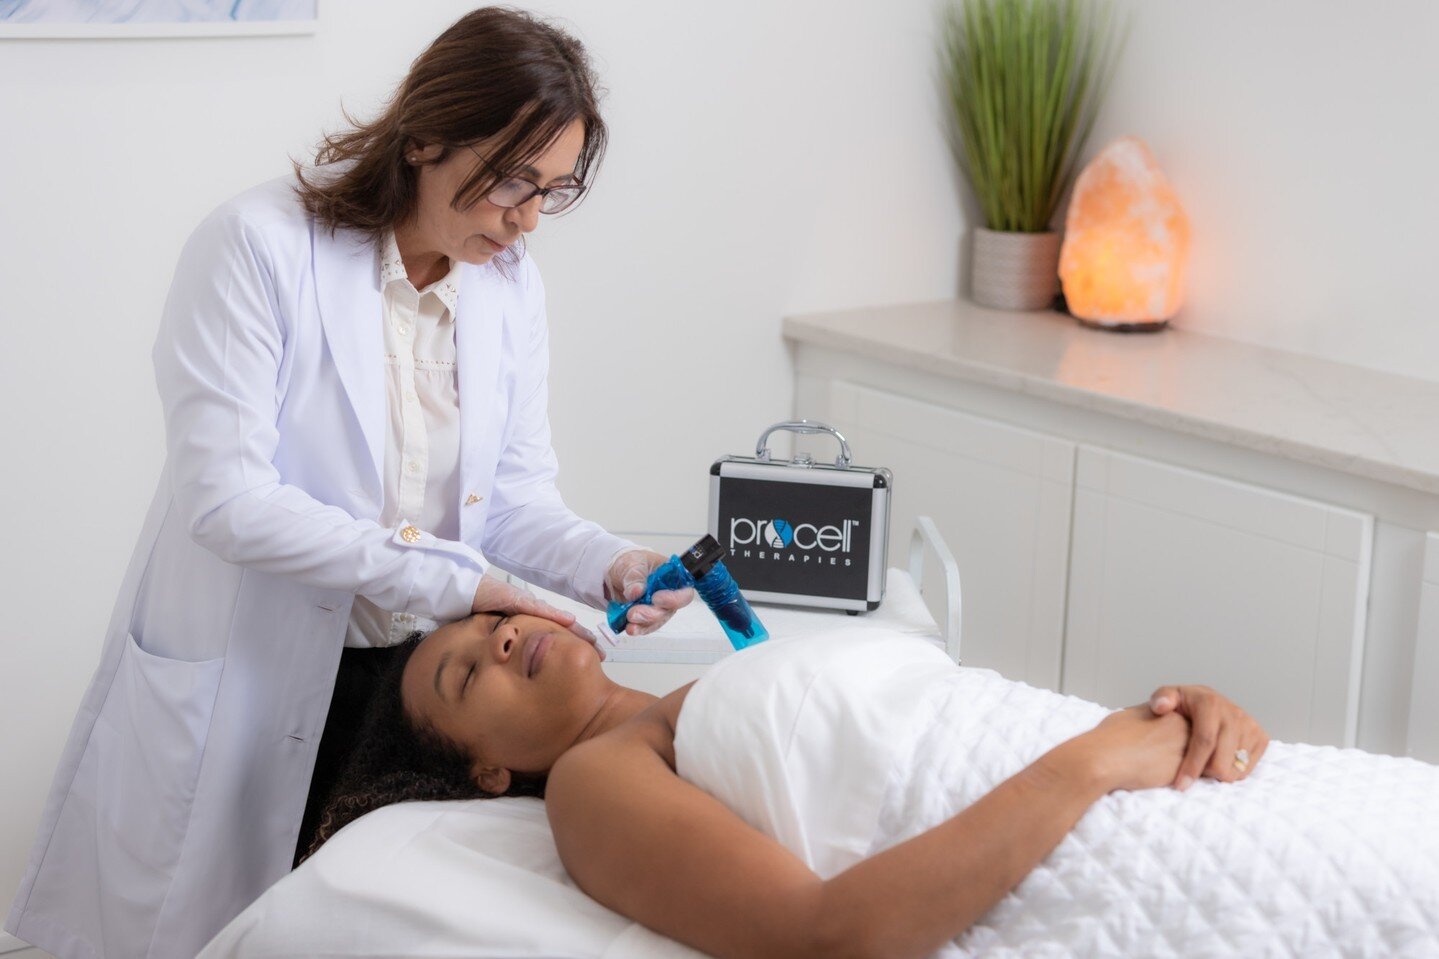 Procell treatment is known for its multiple benefits for the skin such as:
- Soften wrinkles and fine lines
- Provides collagen alignment and formation
- Improves surgical scars and stretch marks
- Reduces unwanted pigment
- Improves pore size and sk